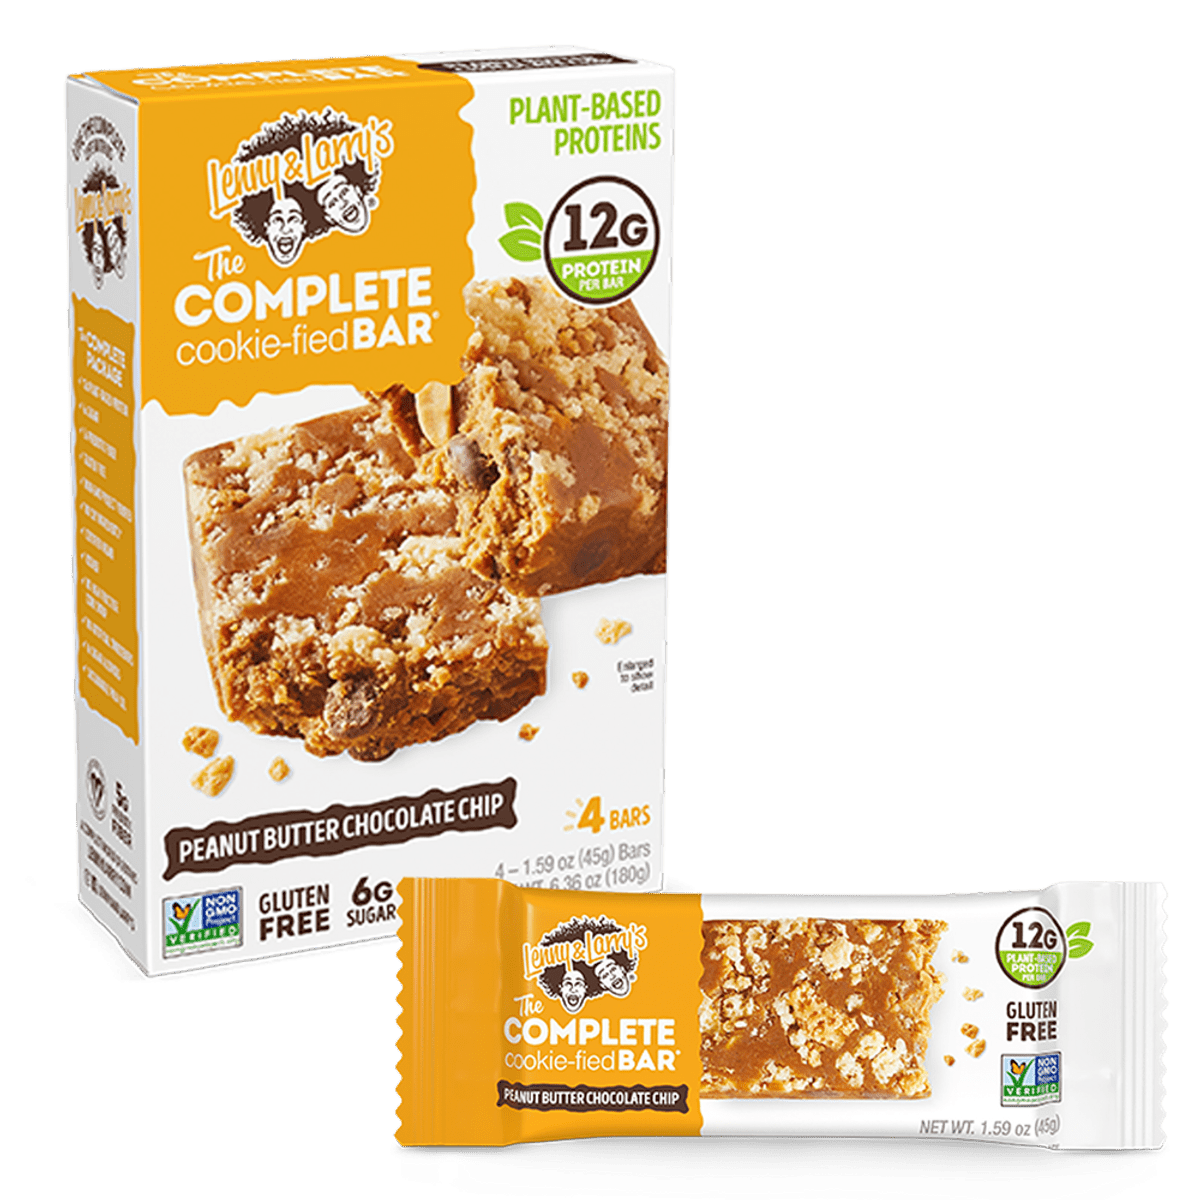 Peanut Butter Chocolate Chip - Box of 4